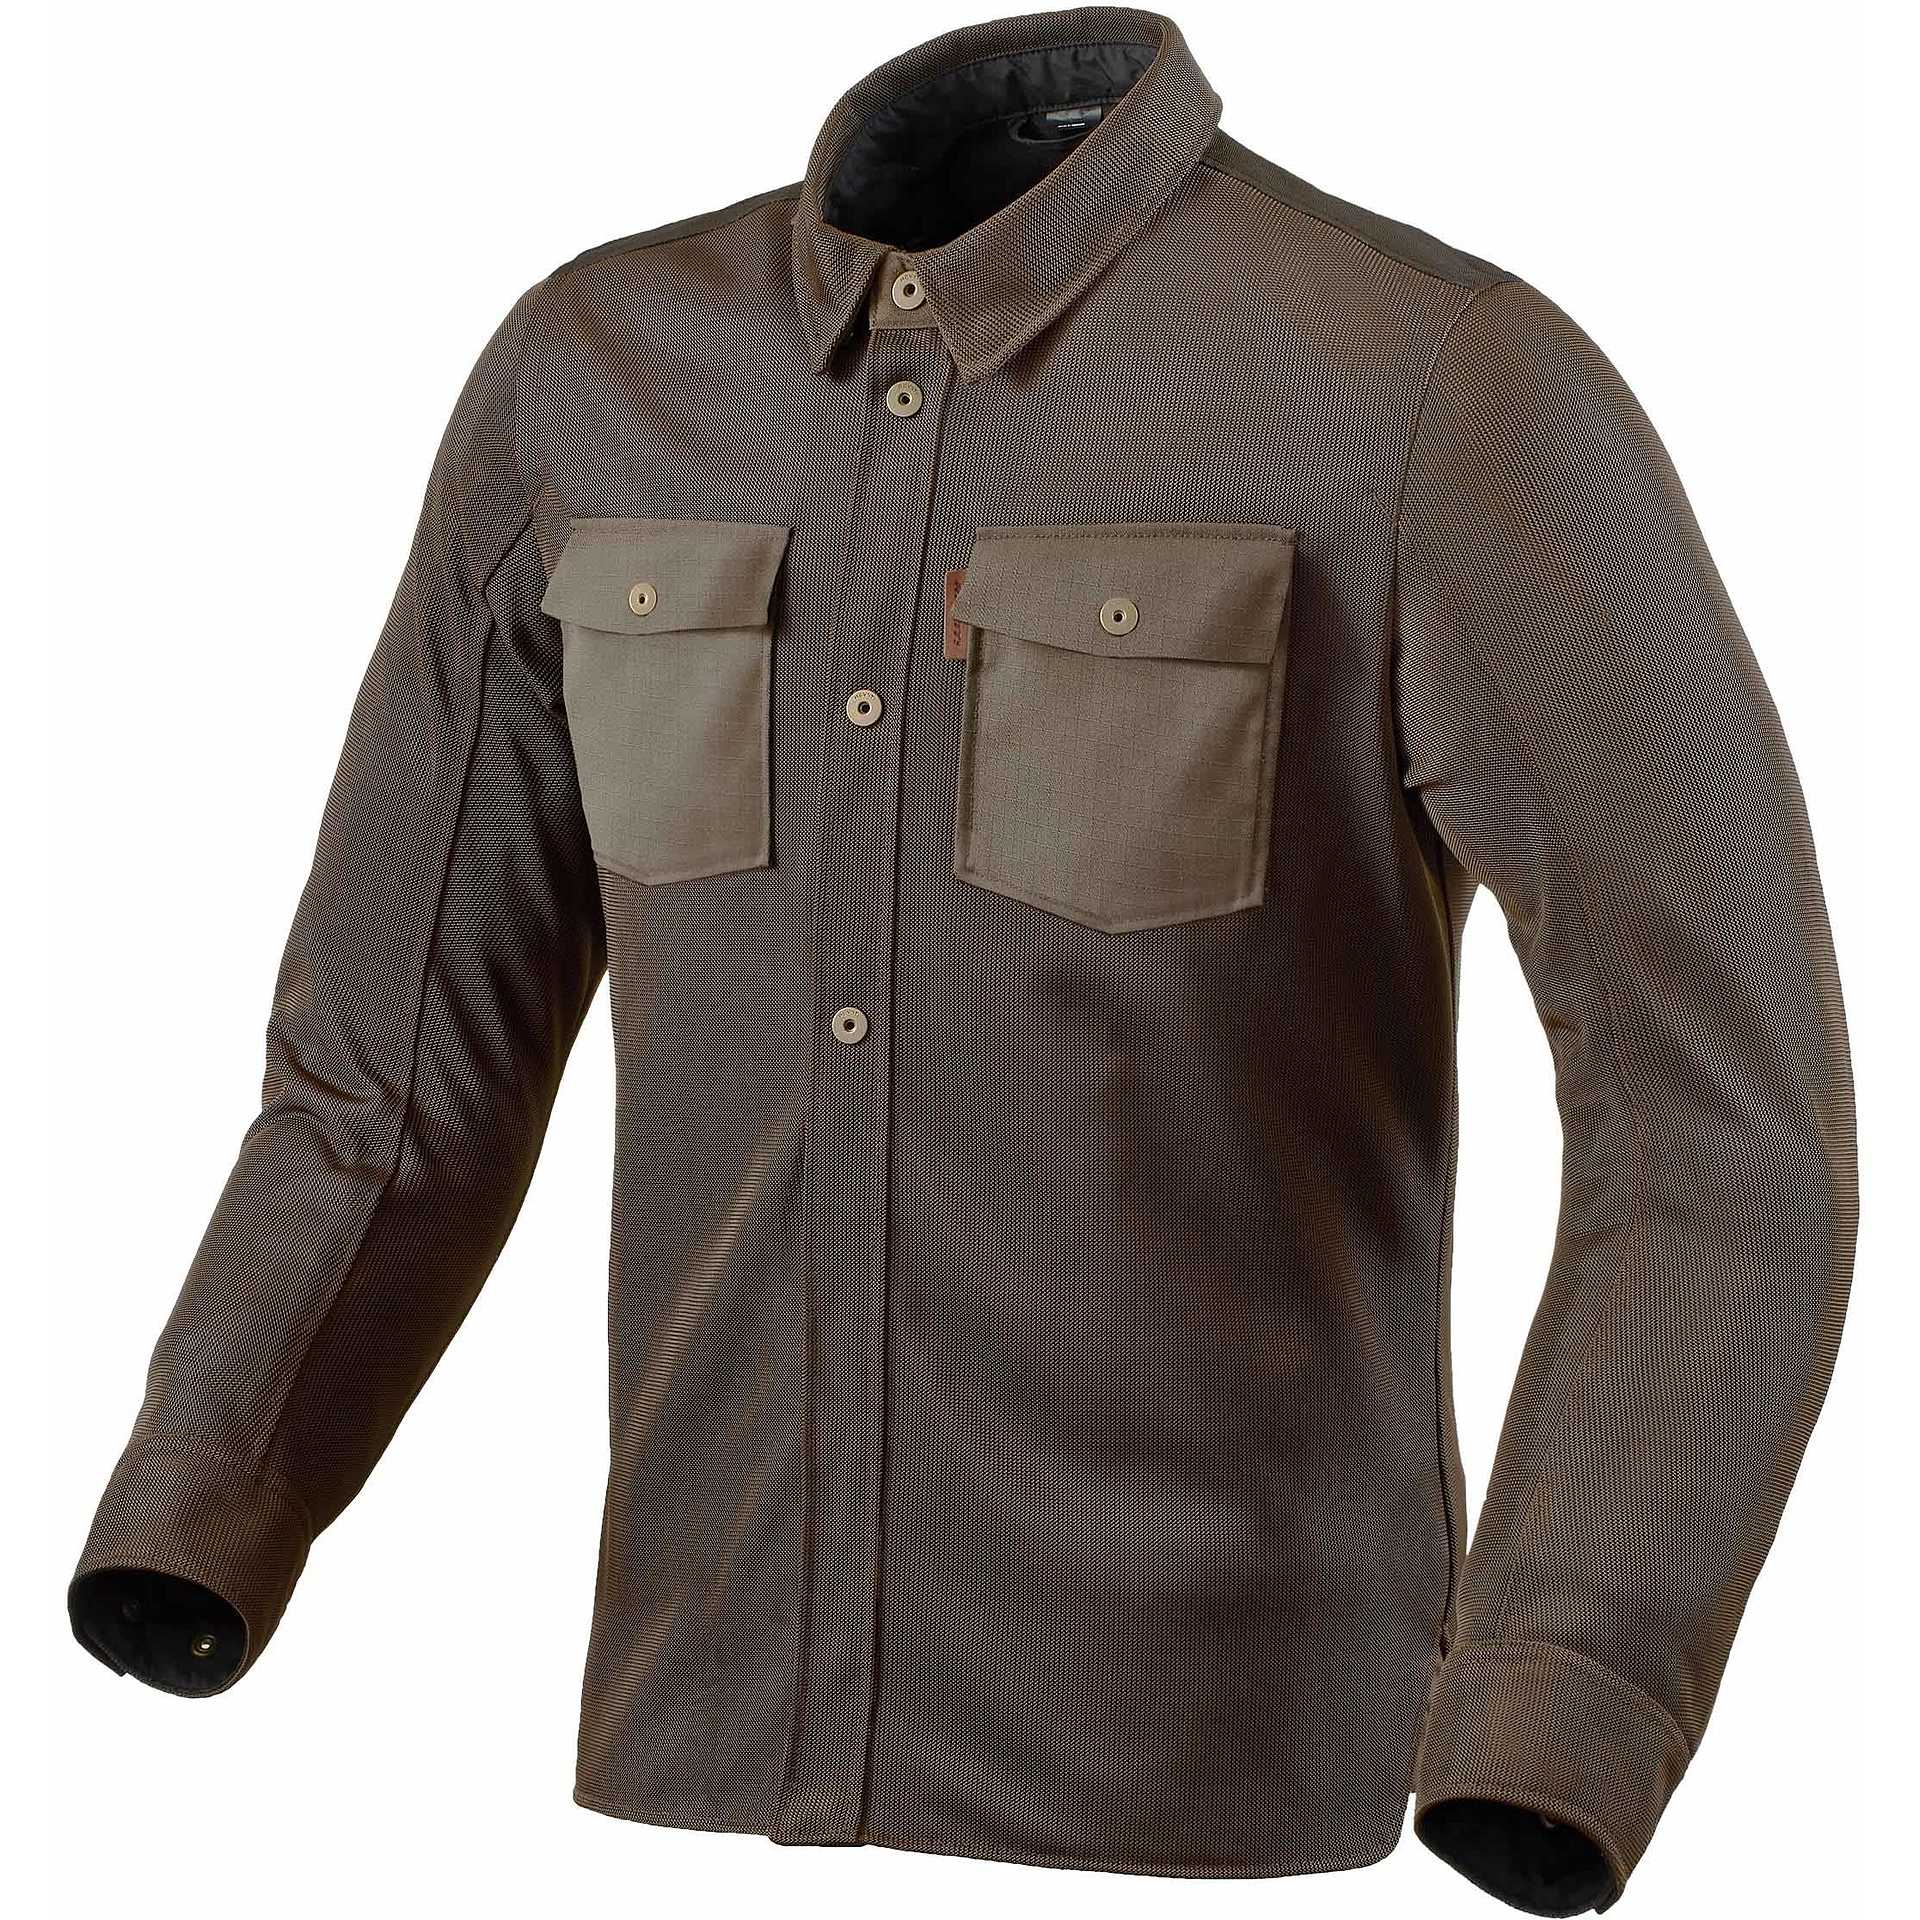 Image of REV'IT! Overshirt Tracer Air 2 Jacket Brown Size M ID 8700001317108